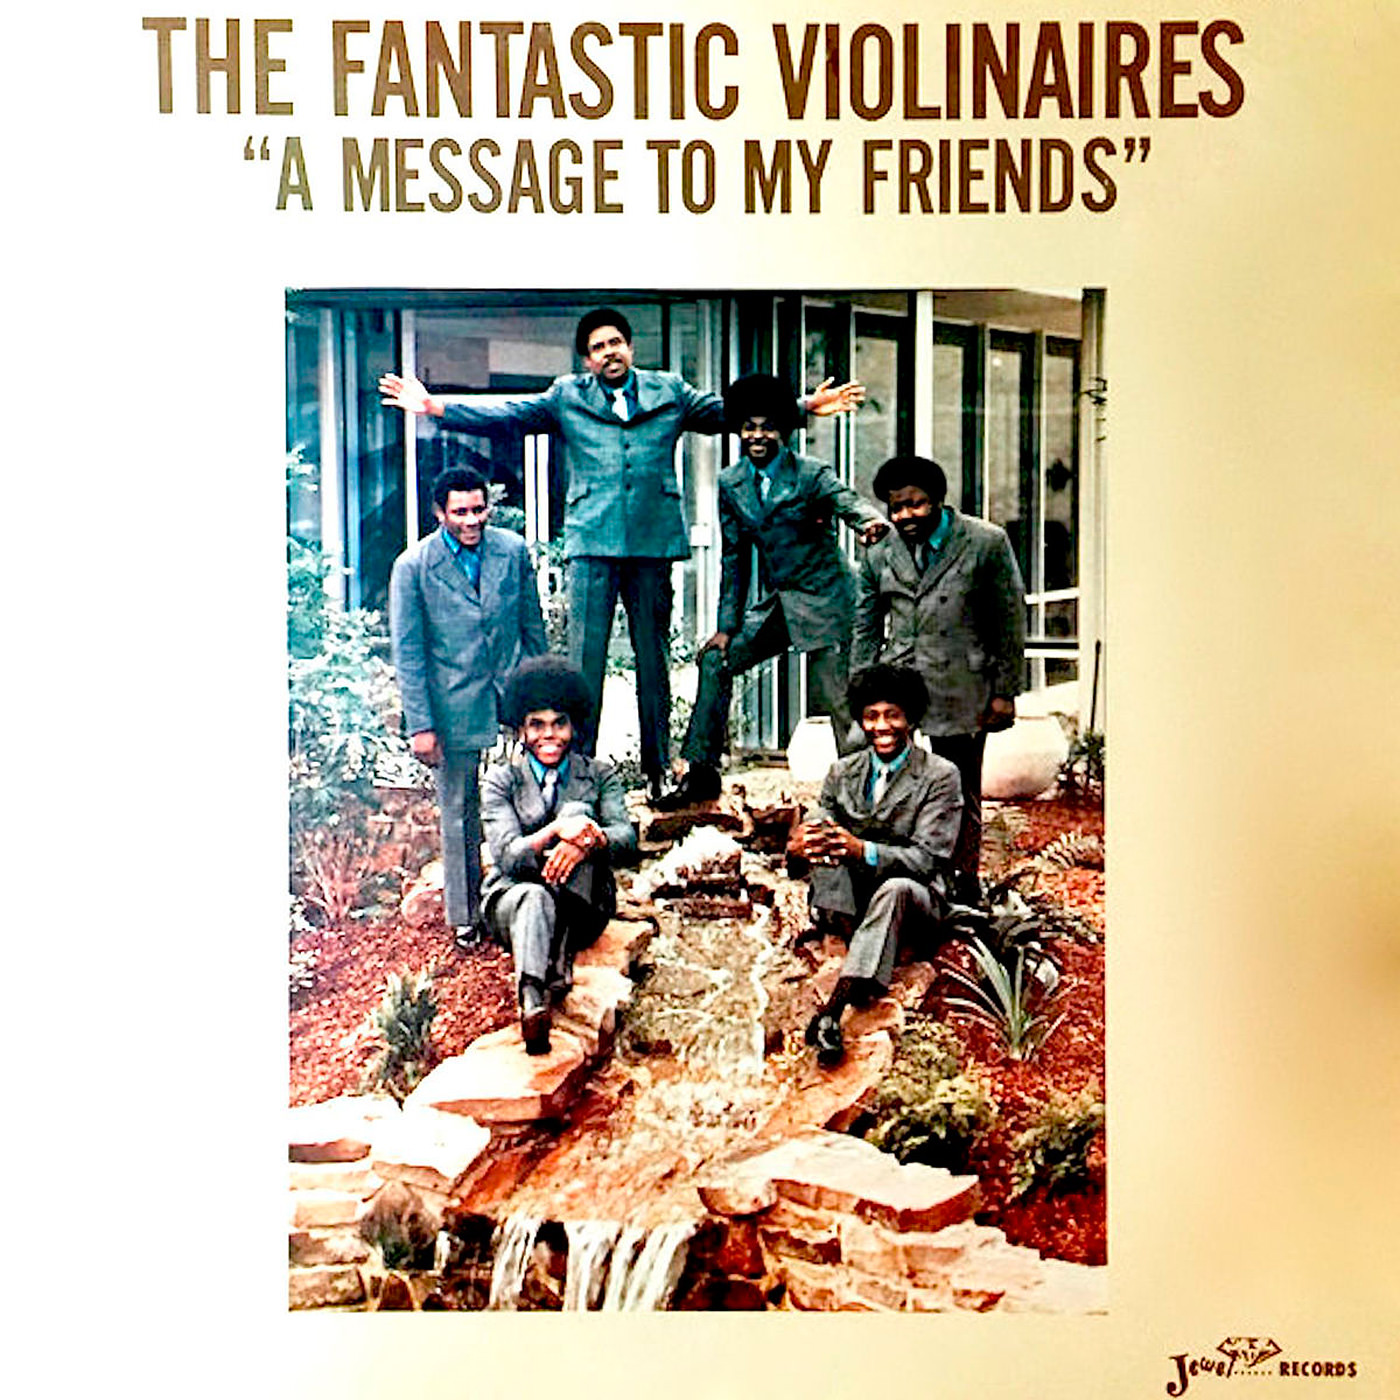 The Violinaires - The Fantastic Violinaires "A Message to My Friends" (1976) [Qobuz FLAC 24bit/96kHz]